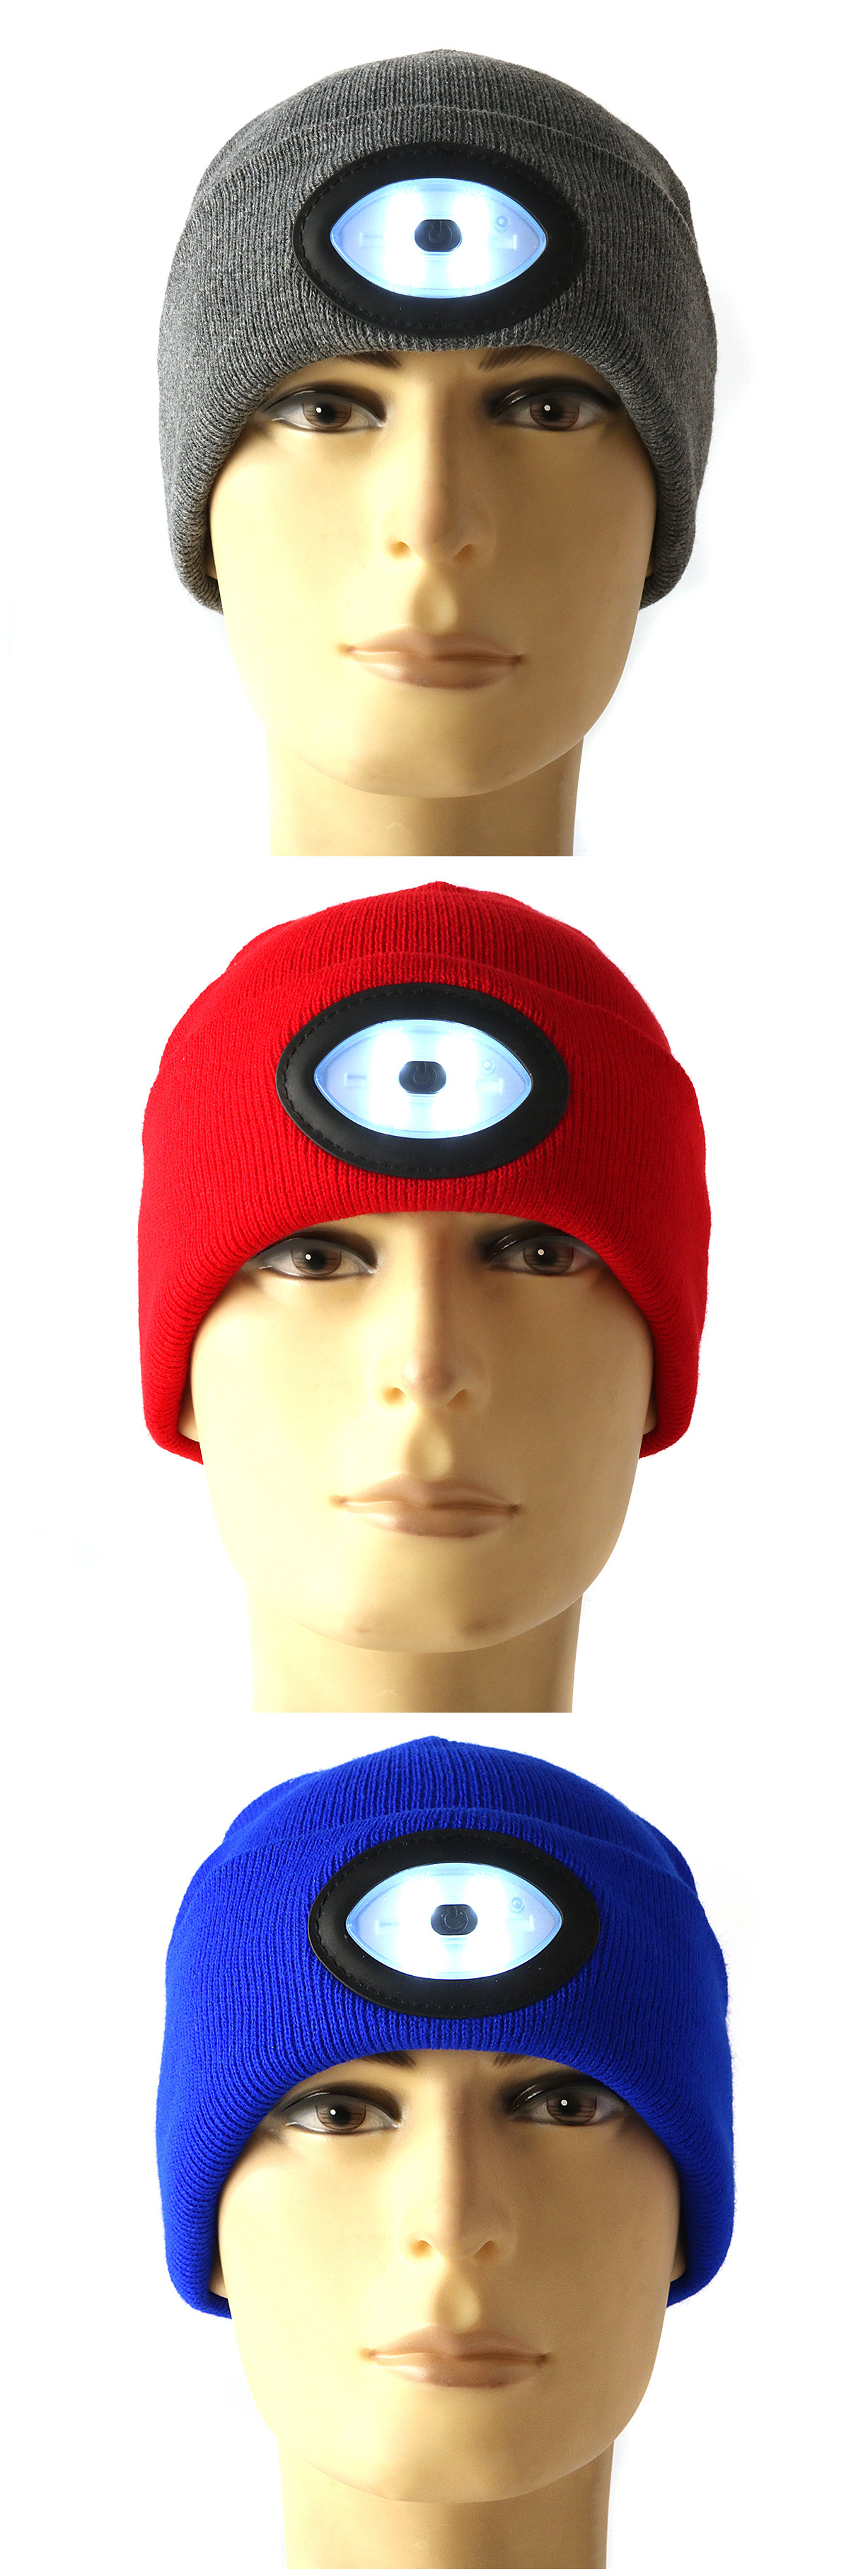 Sports-Running-6-LED-Beanie-Knit-Hat-Rechargeable-Cap-Light-Camping-Climbing-Lamp-1133127-3